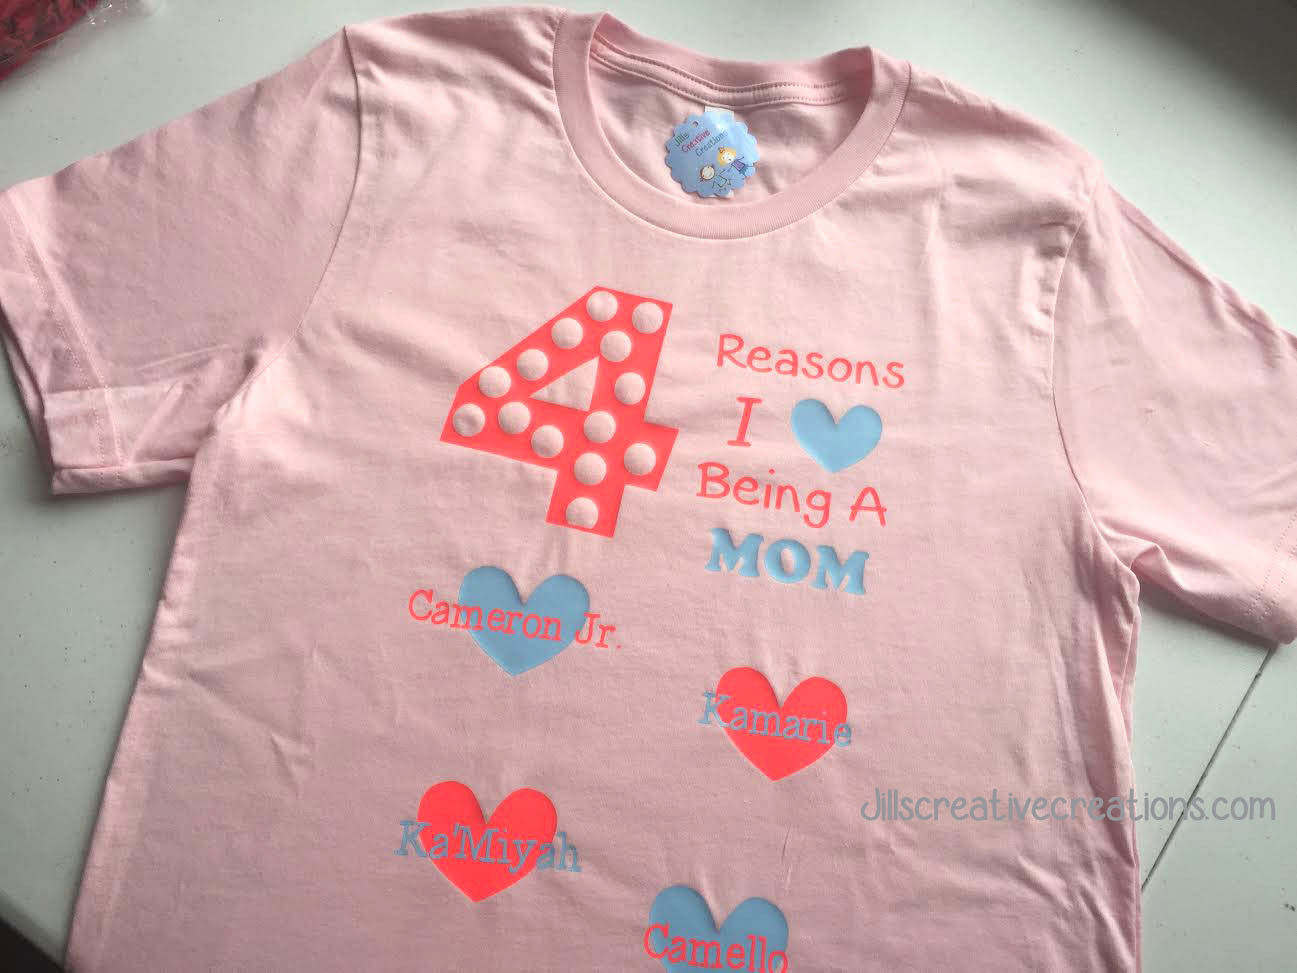 Reasons I love being a mom shirt